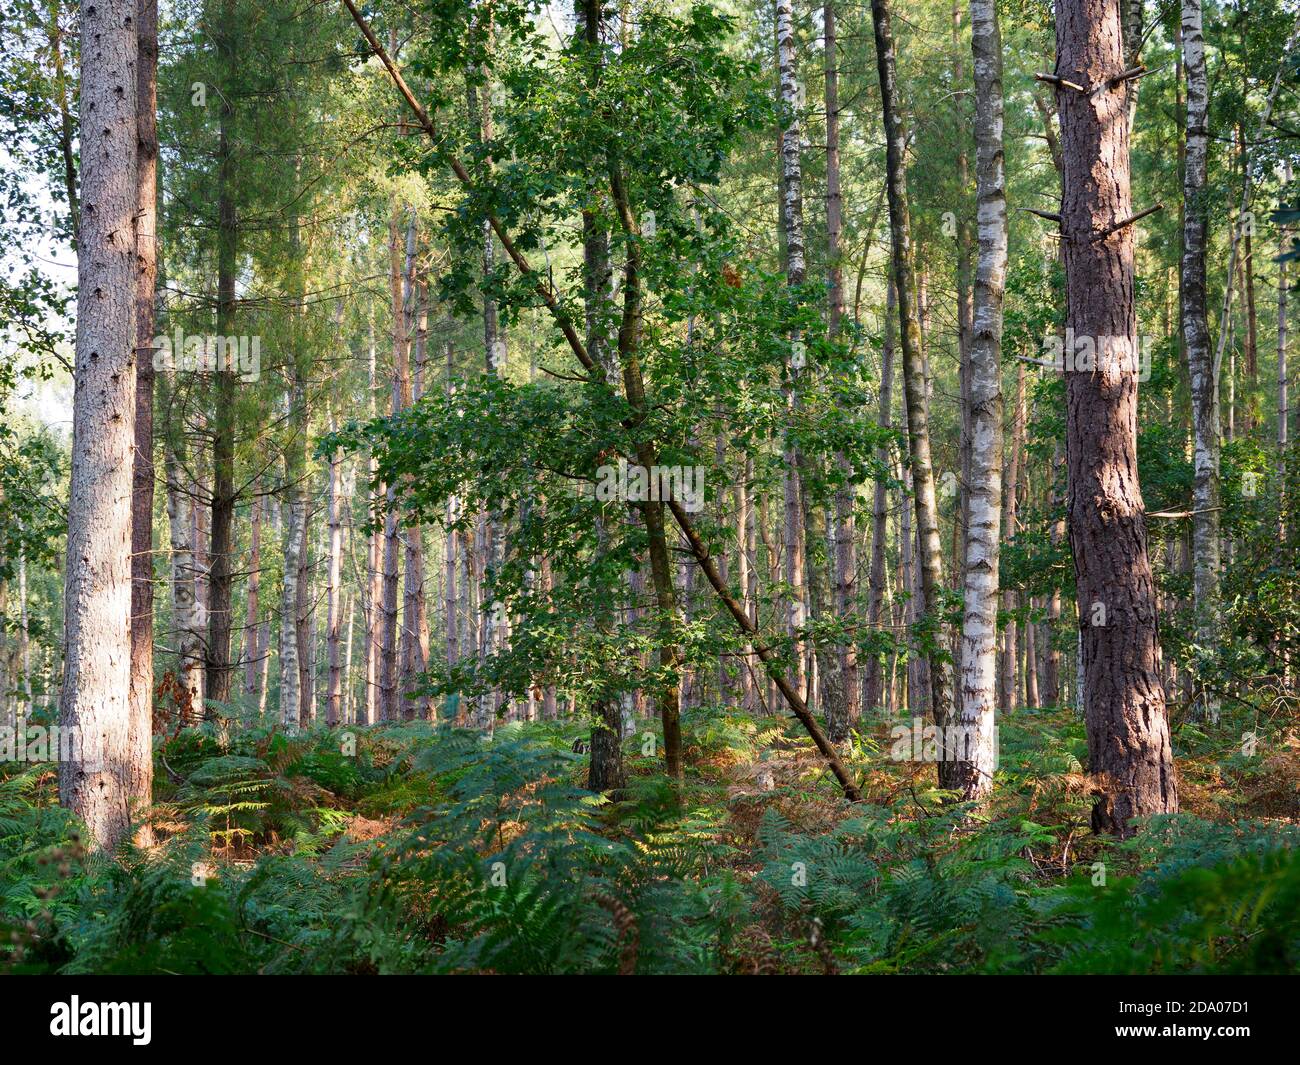 The start of Autumn in the Thetford Forest, Norfolk, UK Stock Photo